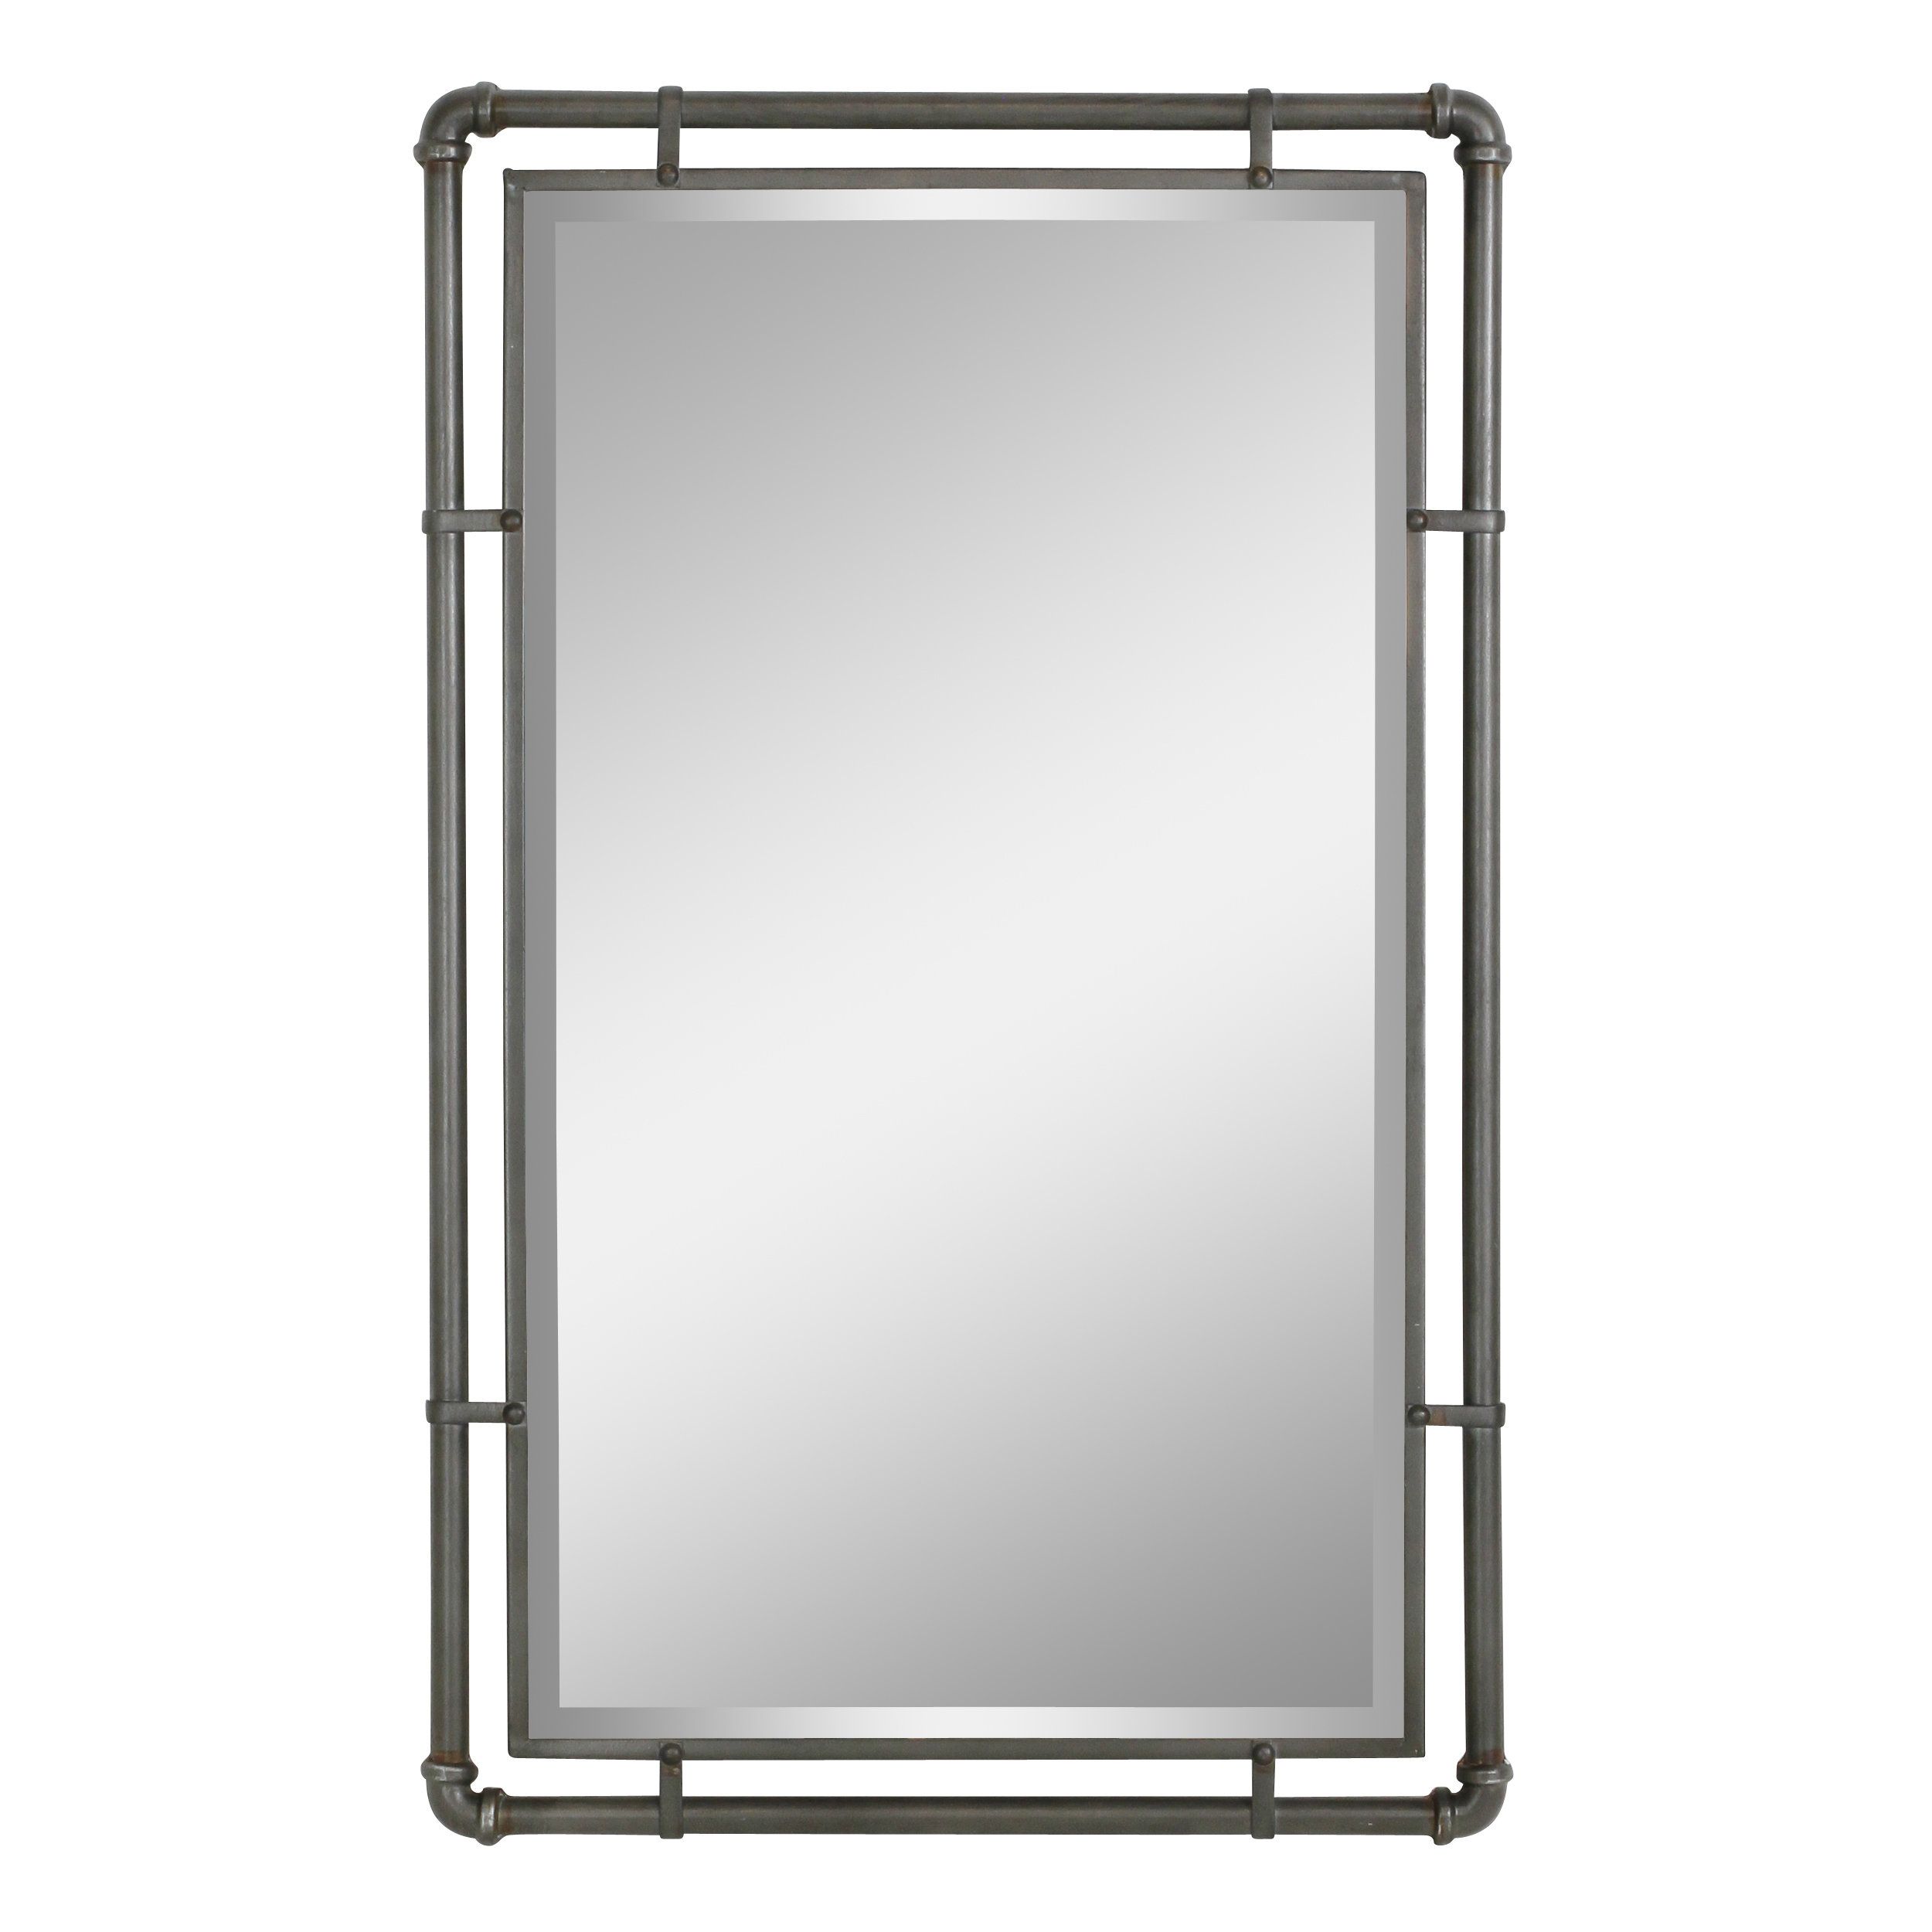 Williston Forge Koeller Industrial Metal Wall Mirror With Regard To Koeller Industrial Metal Wall Mirrors (View 1 of 30)